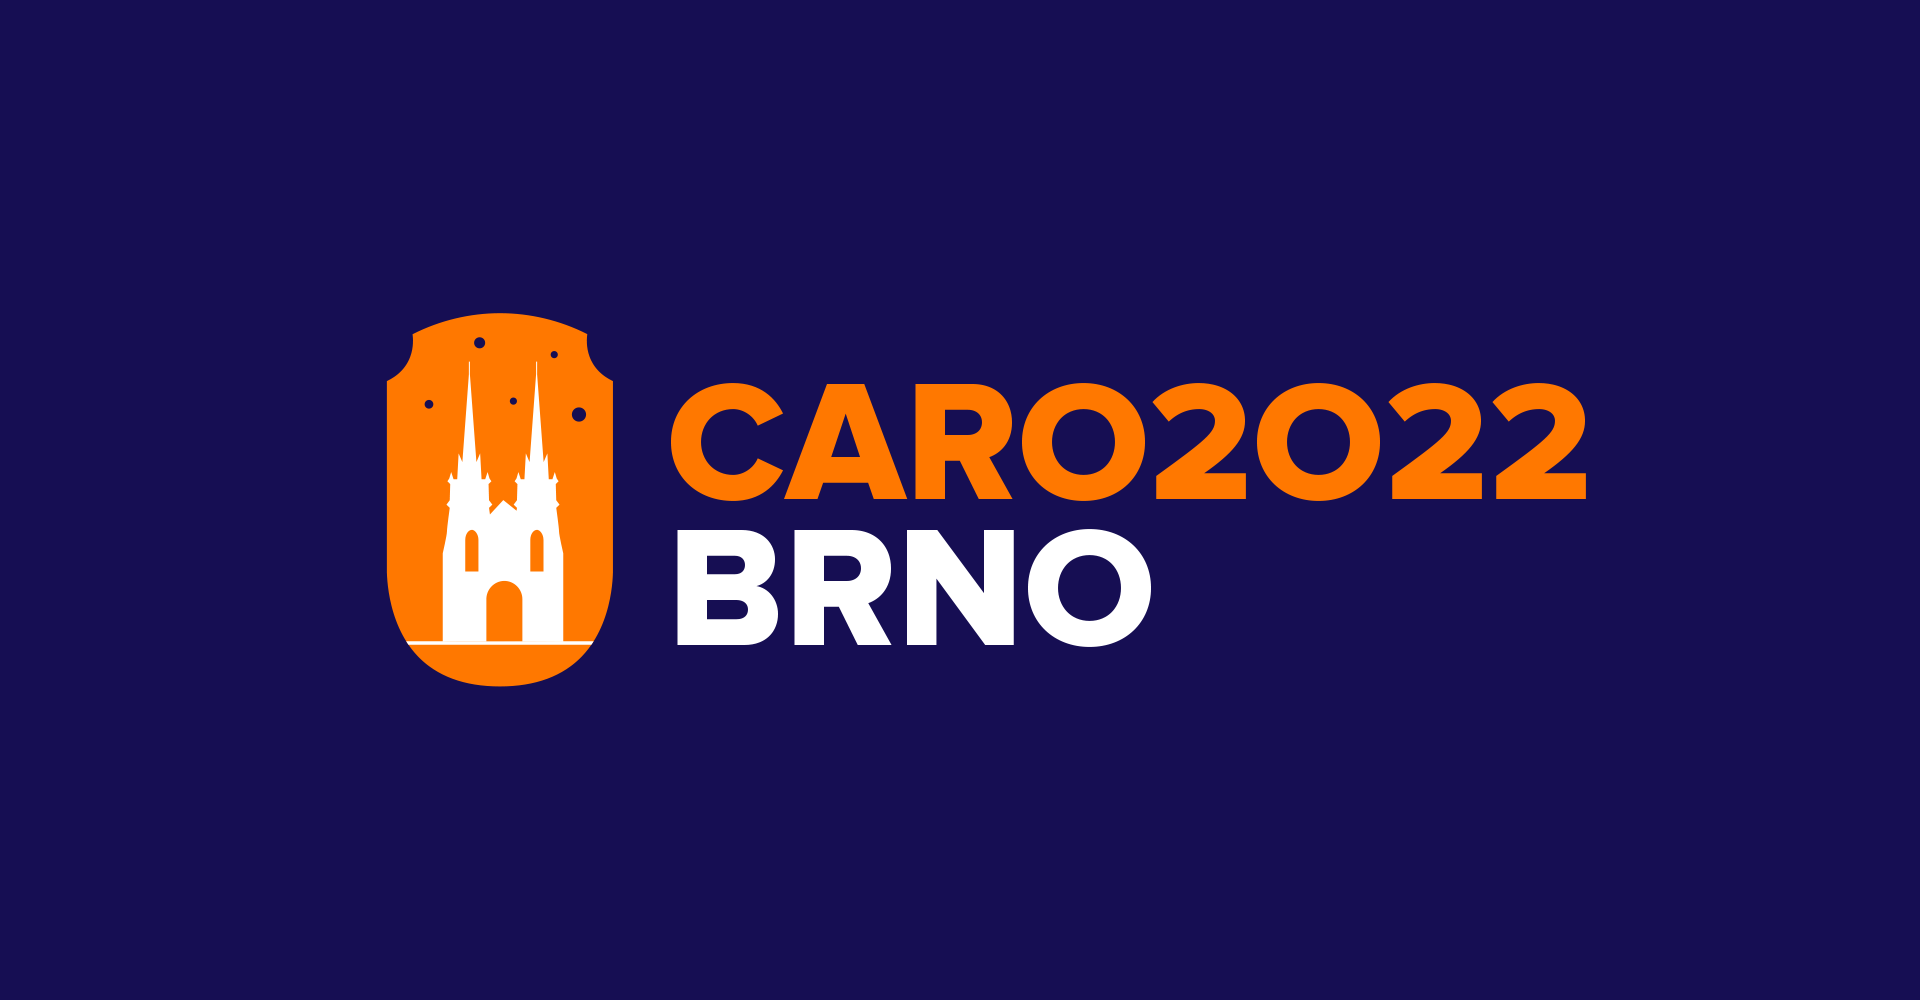 Here’s what to look forward to at CARO Workshop 2022